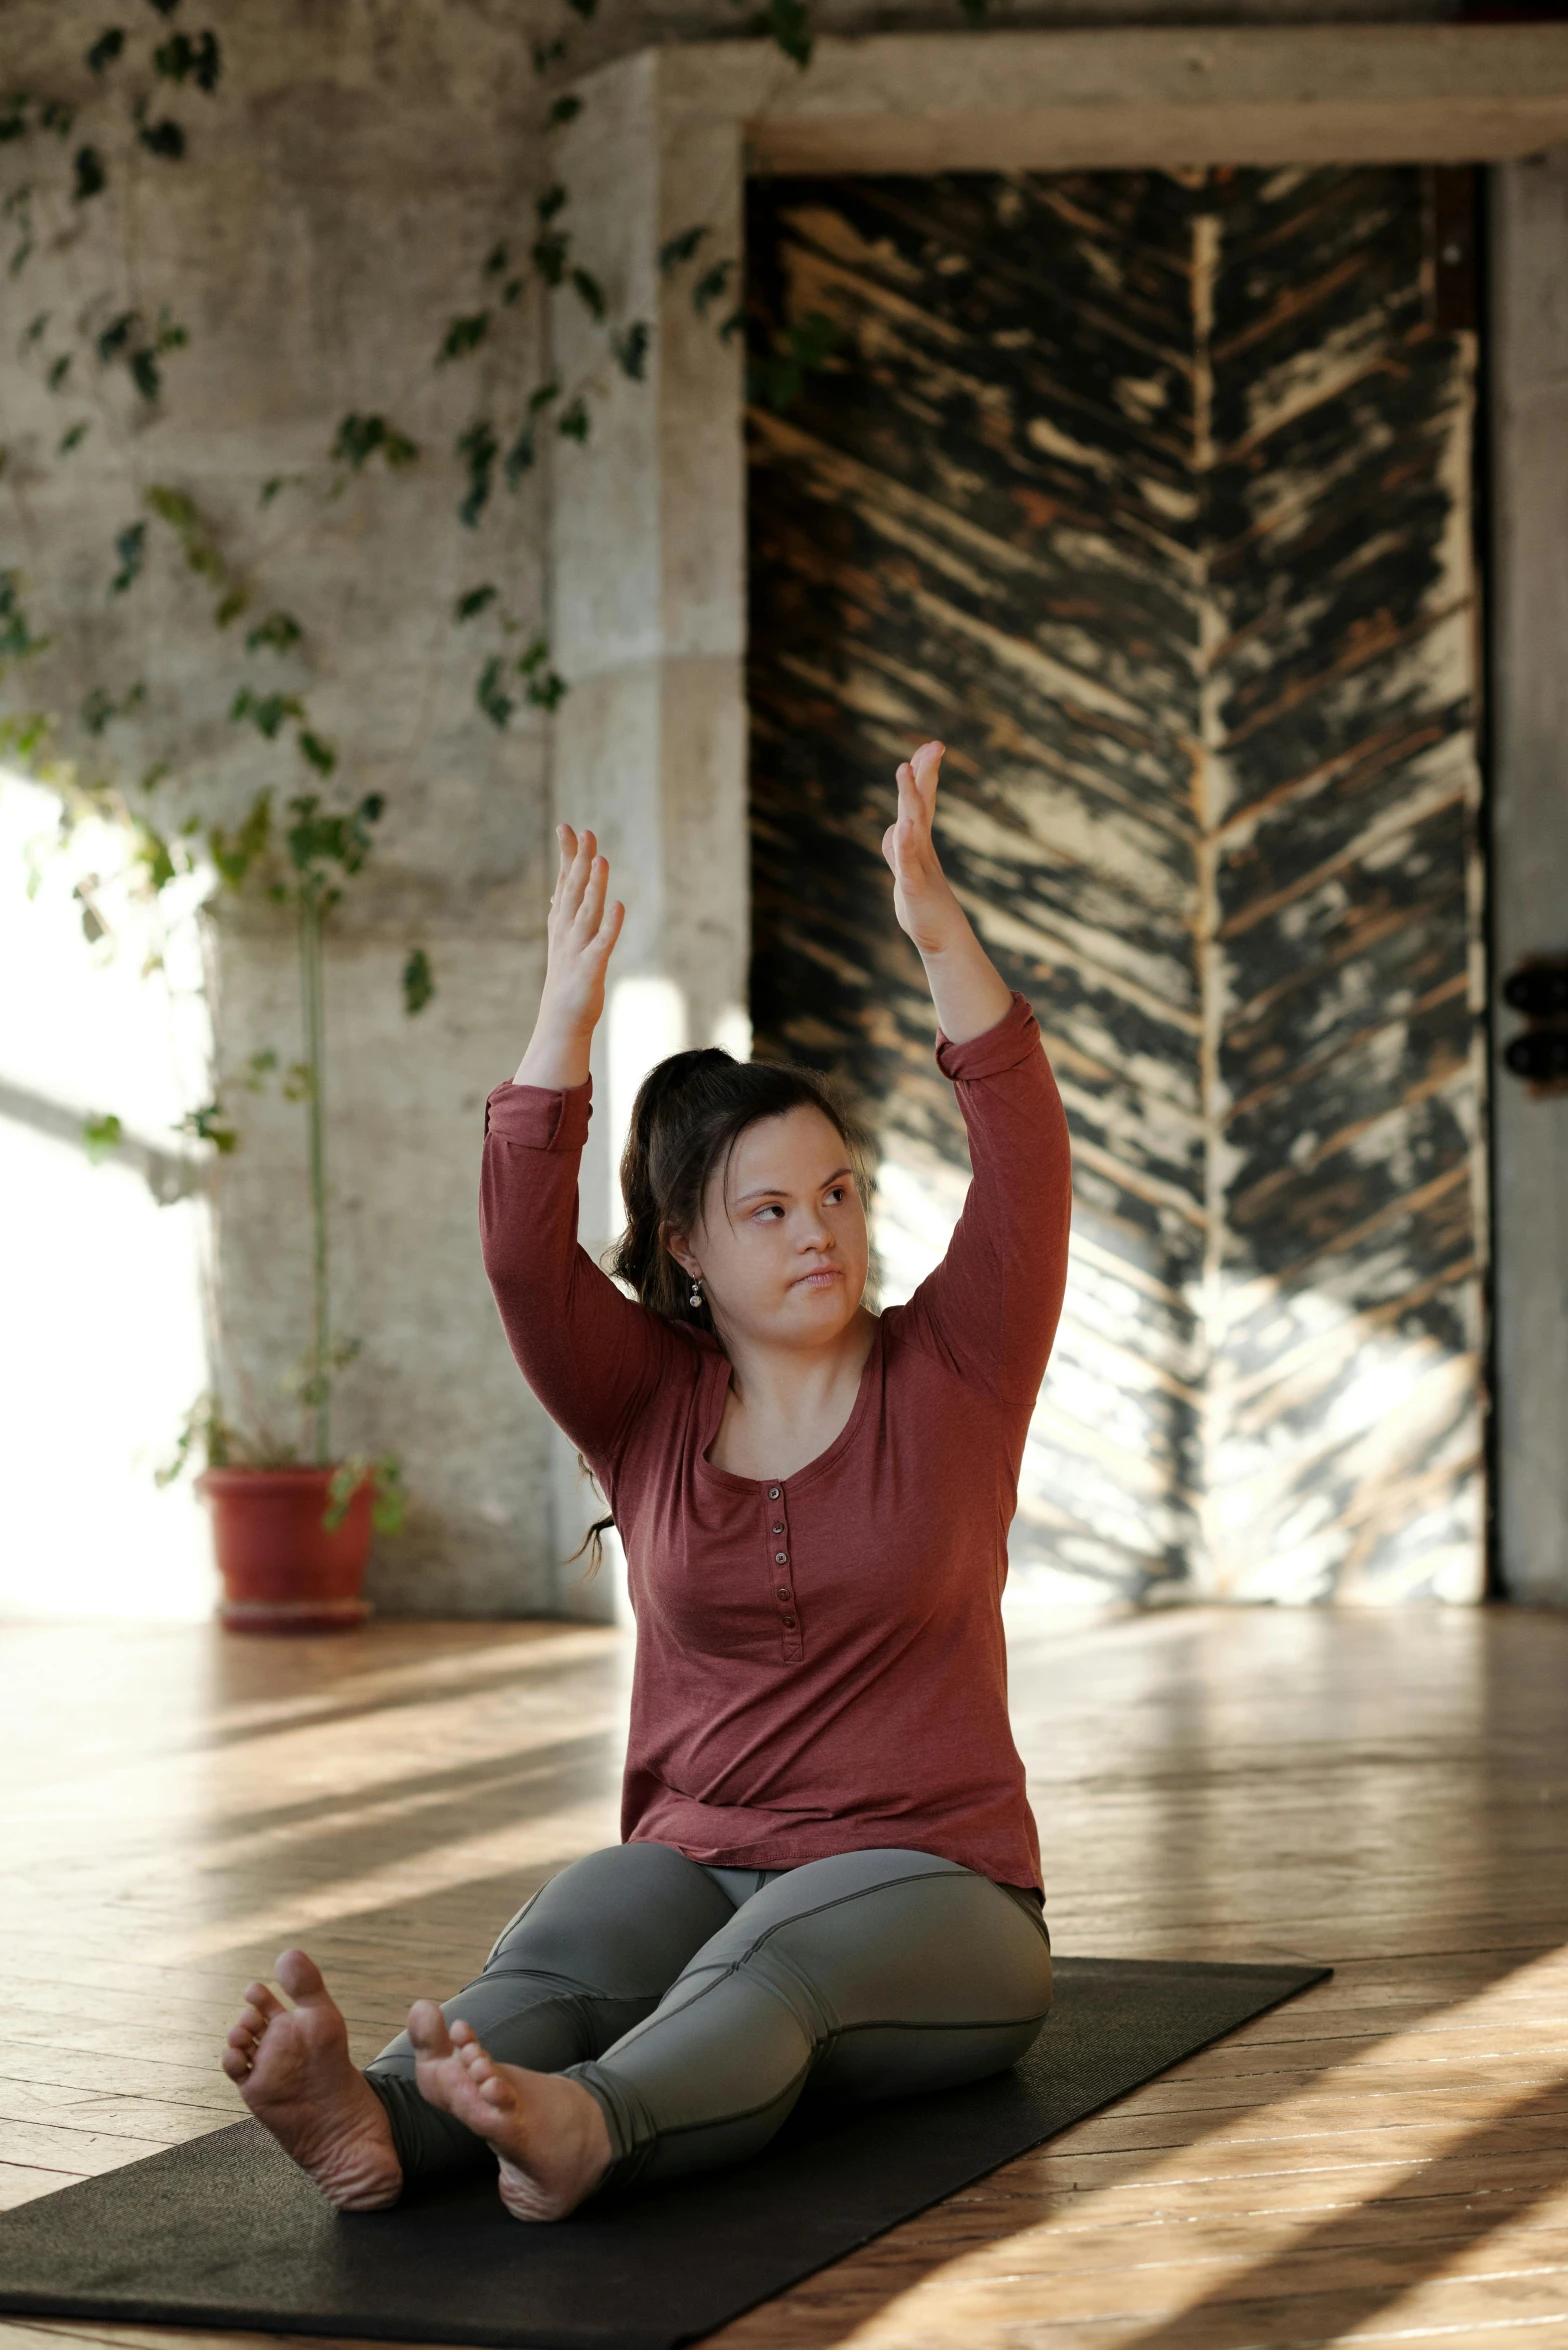 a woman sitting on a yoga mat doing a yoga pose, by Sigrid Hjertén, renaissance, with arms up, indoor setting, promo image, in the center of the image